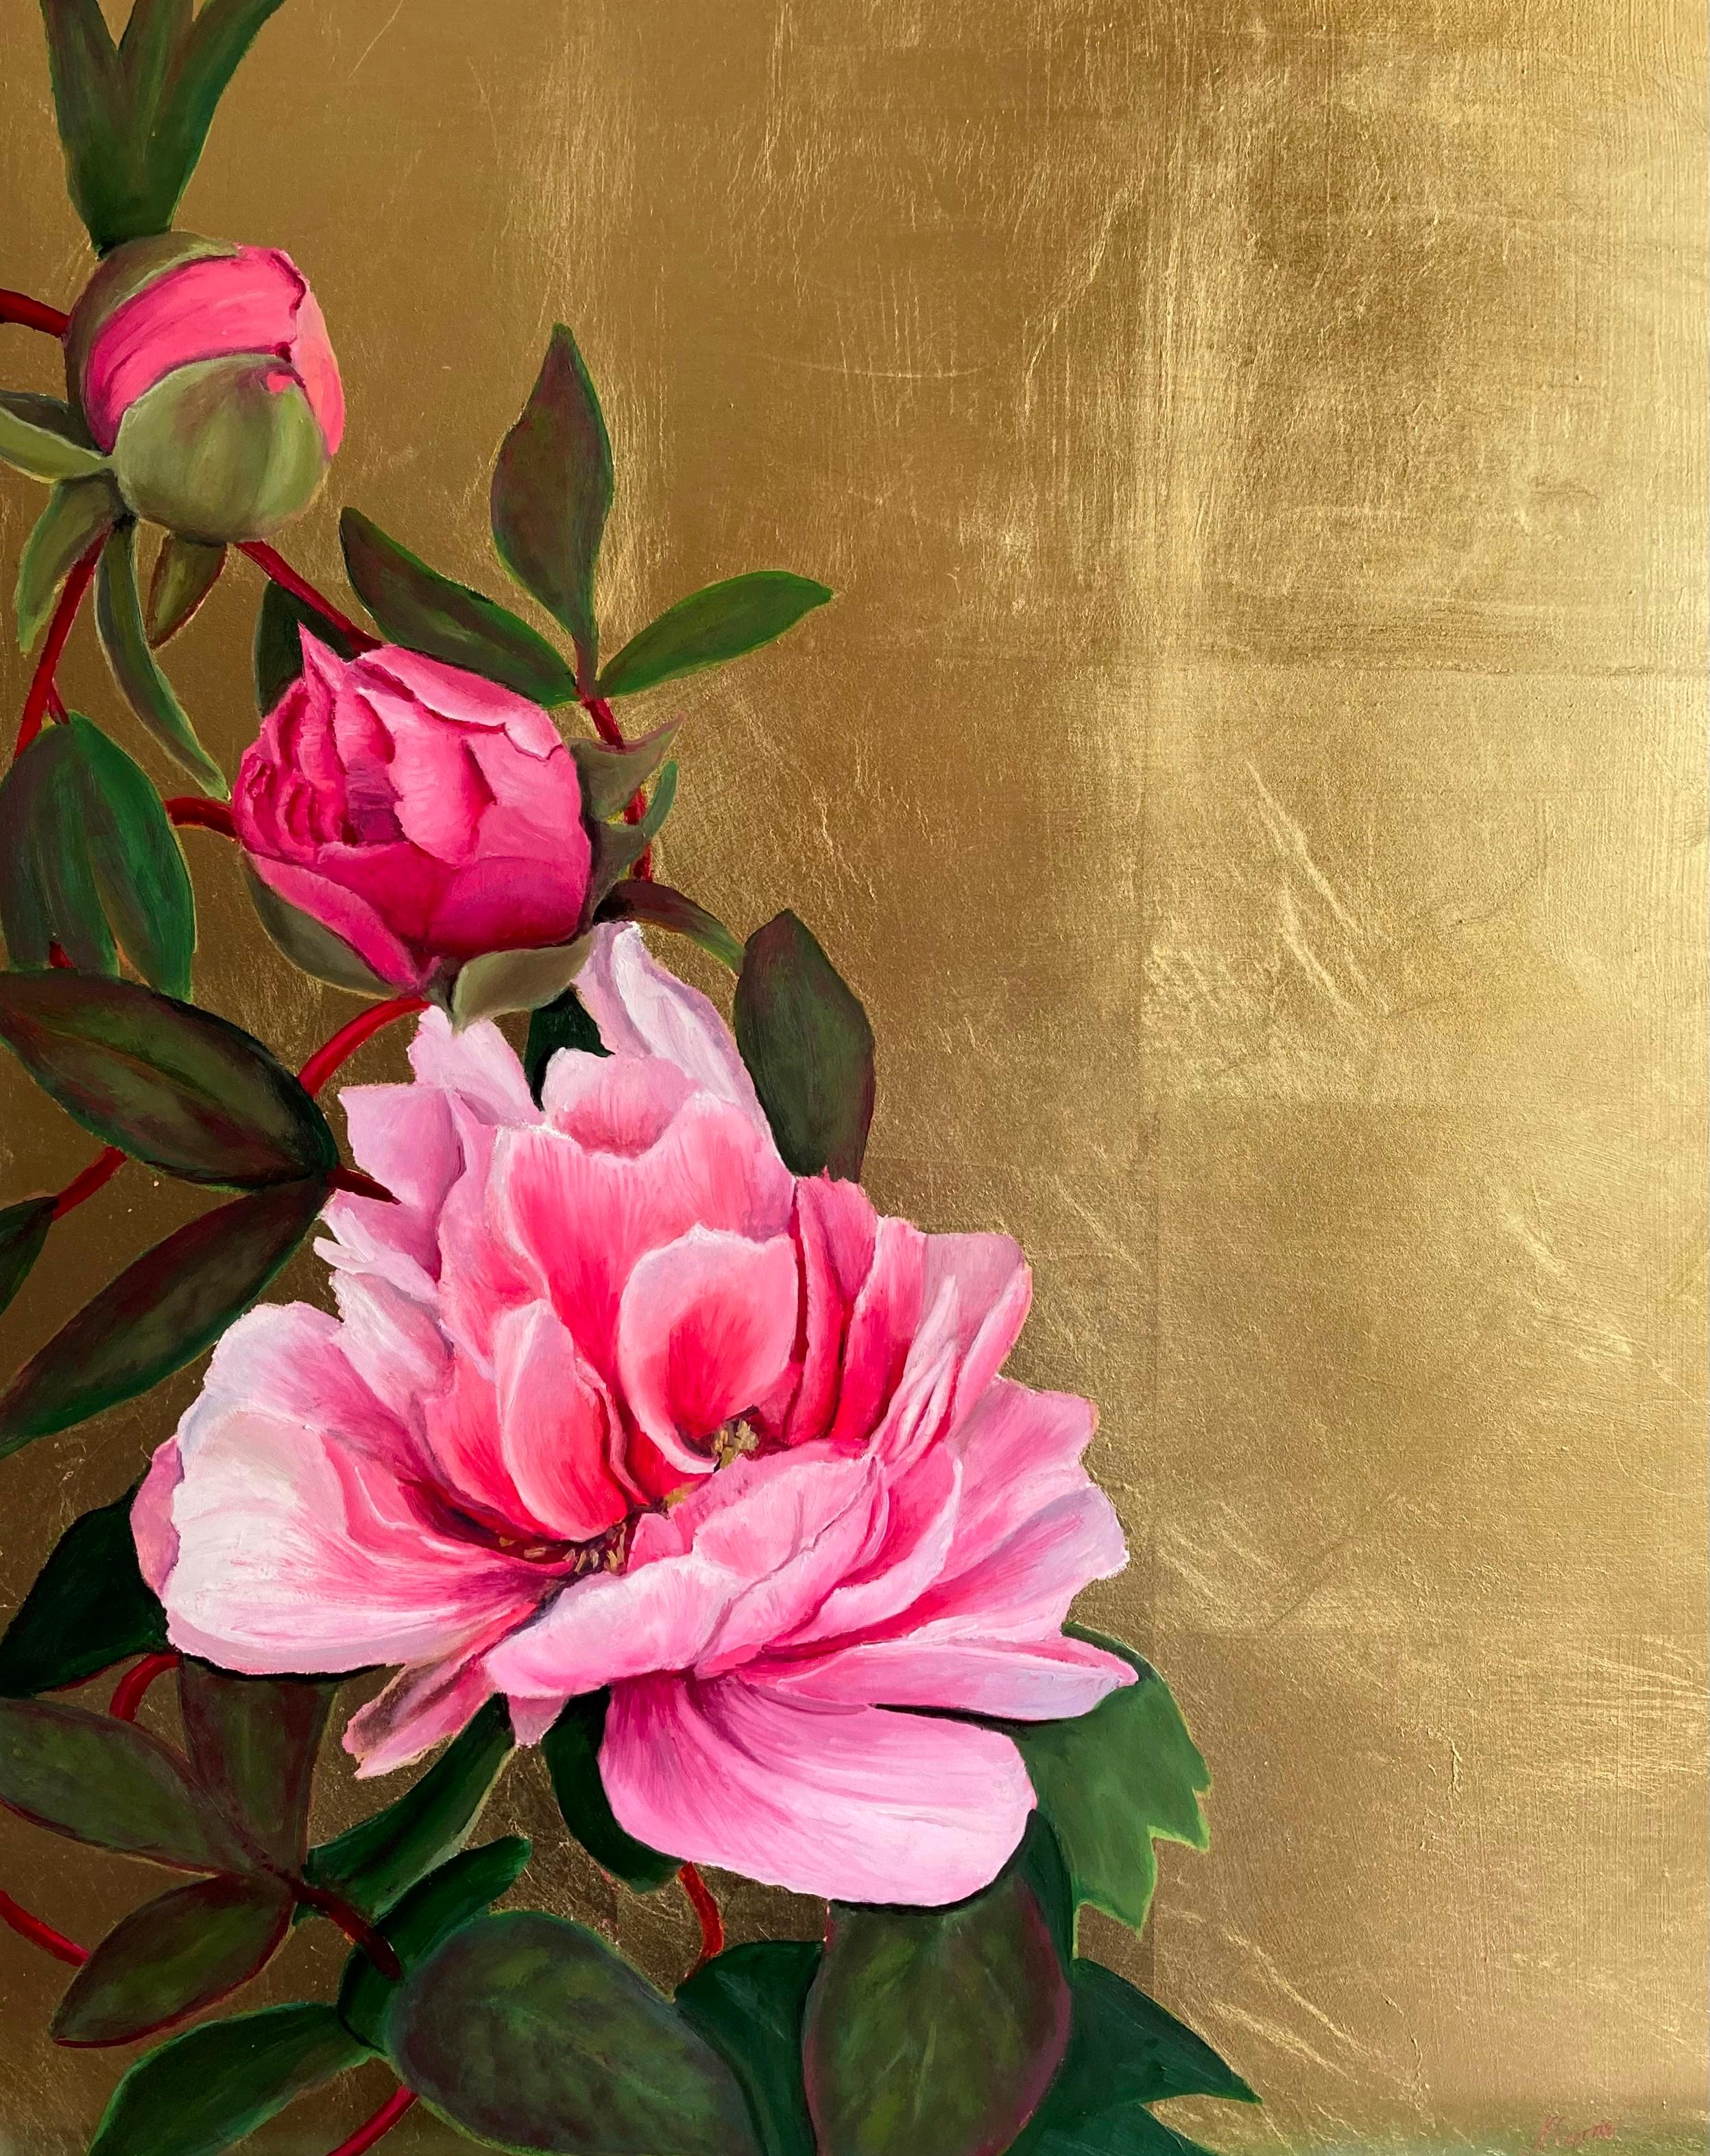 Spetchley Coral Peonies on Gold - Mixed Media Art by Nicola Currie